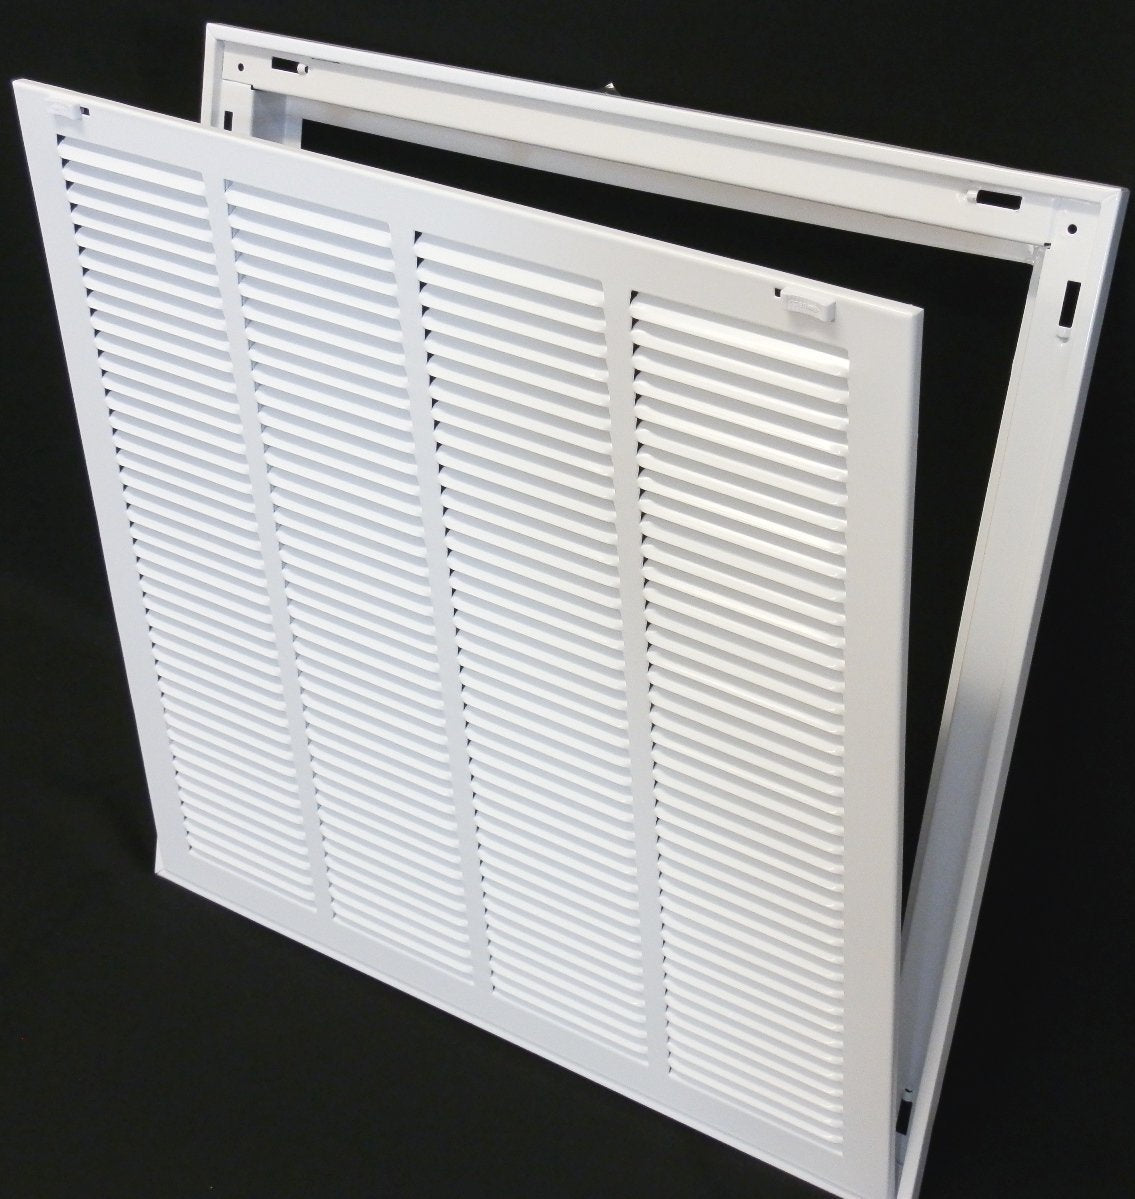 10&quot; X 18&quot; Steel Return Air Filter Grille for 1&quot; Filter - Removable Frame - [Outer Dimensions: 12 5/8&quot; X 20 5/8&quot;]